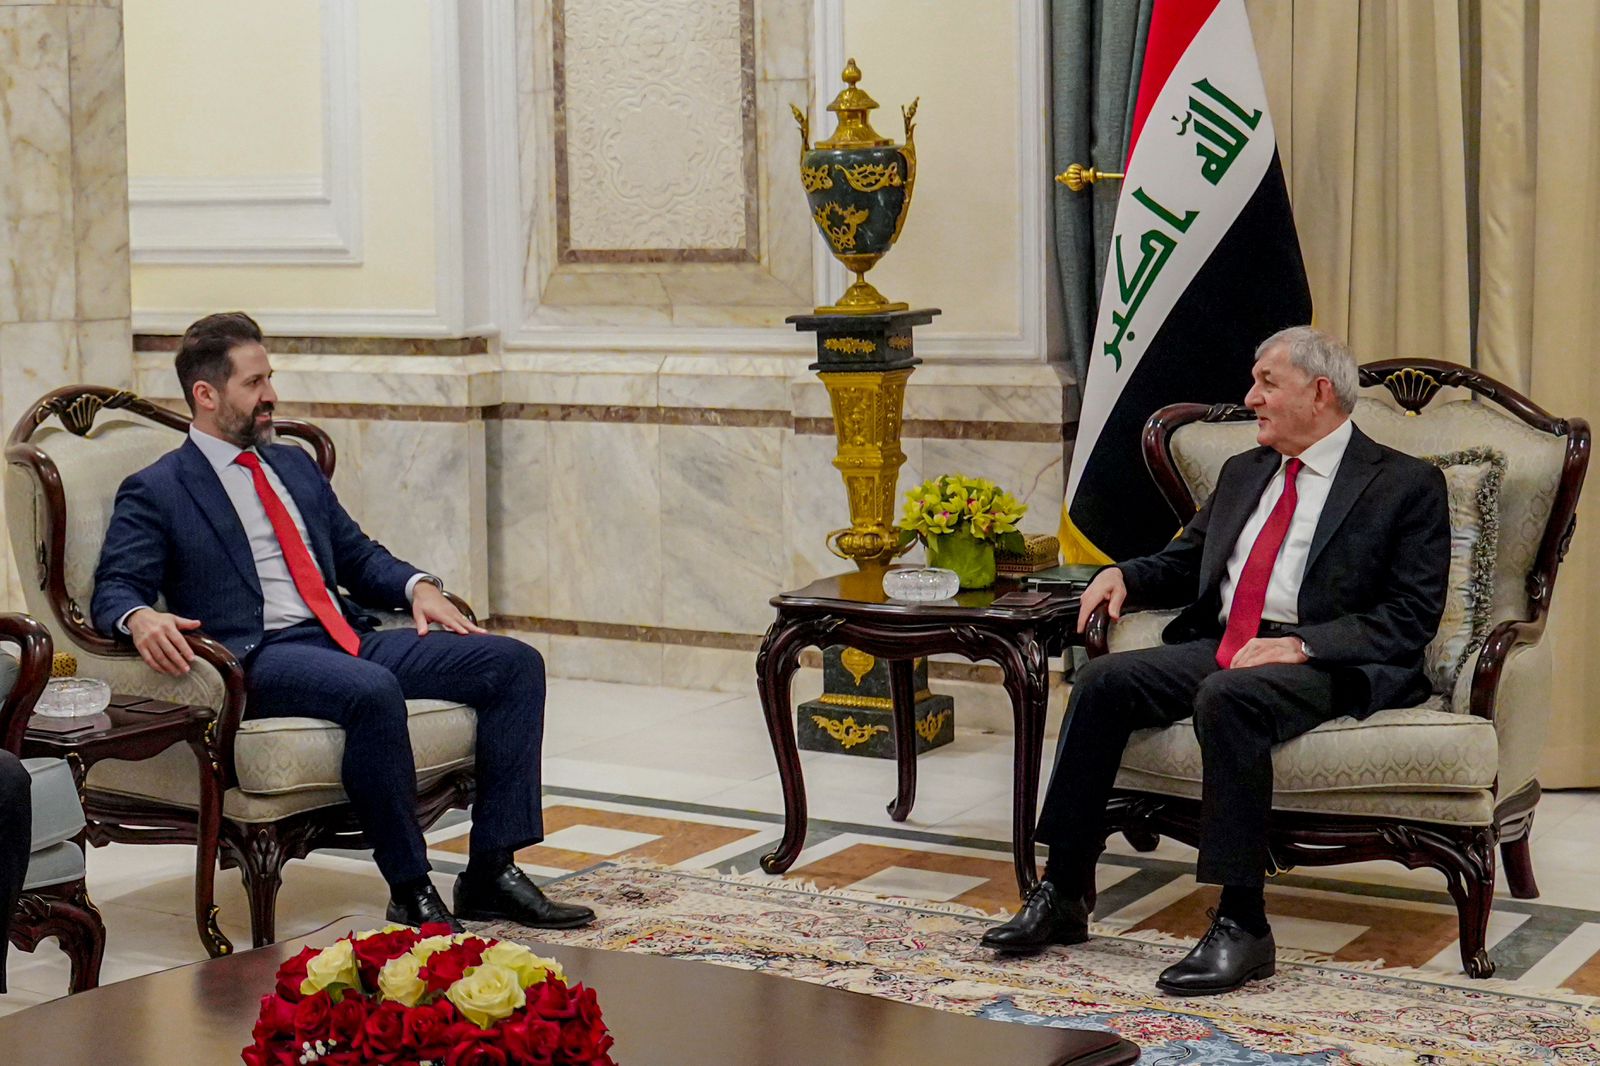 The Iraqi President calls for a "serious" dialogue between Baghdad and Erbil